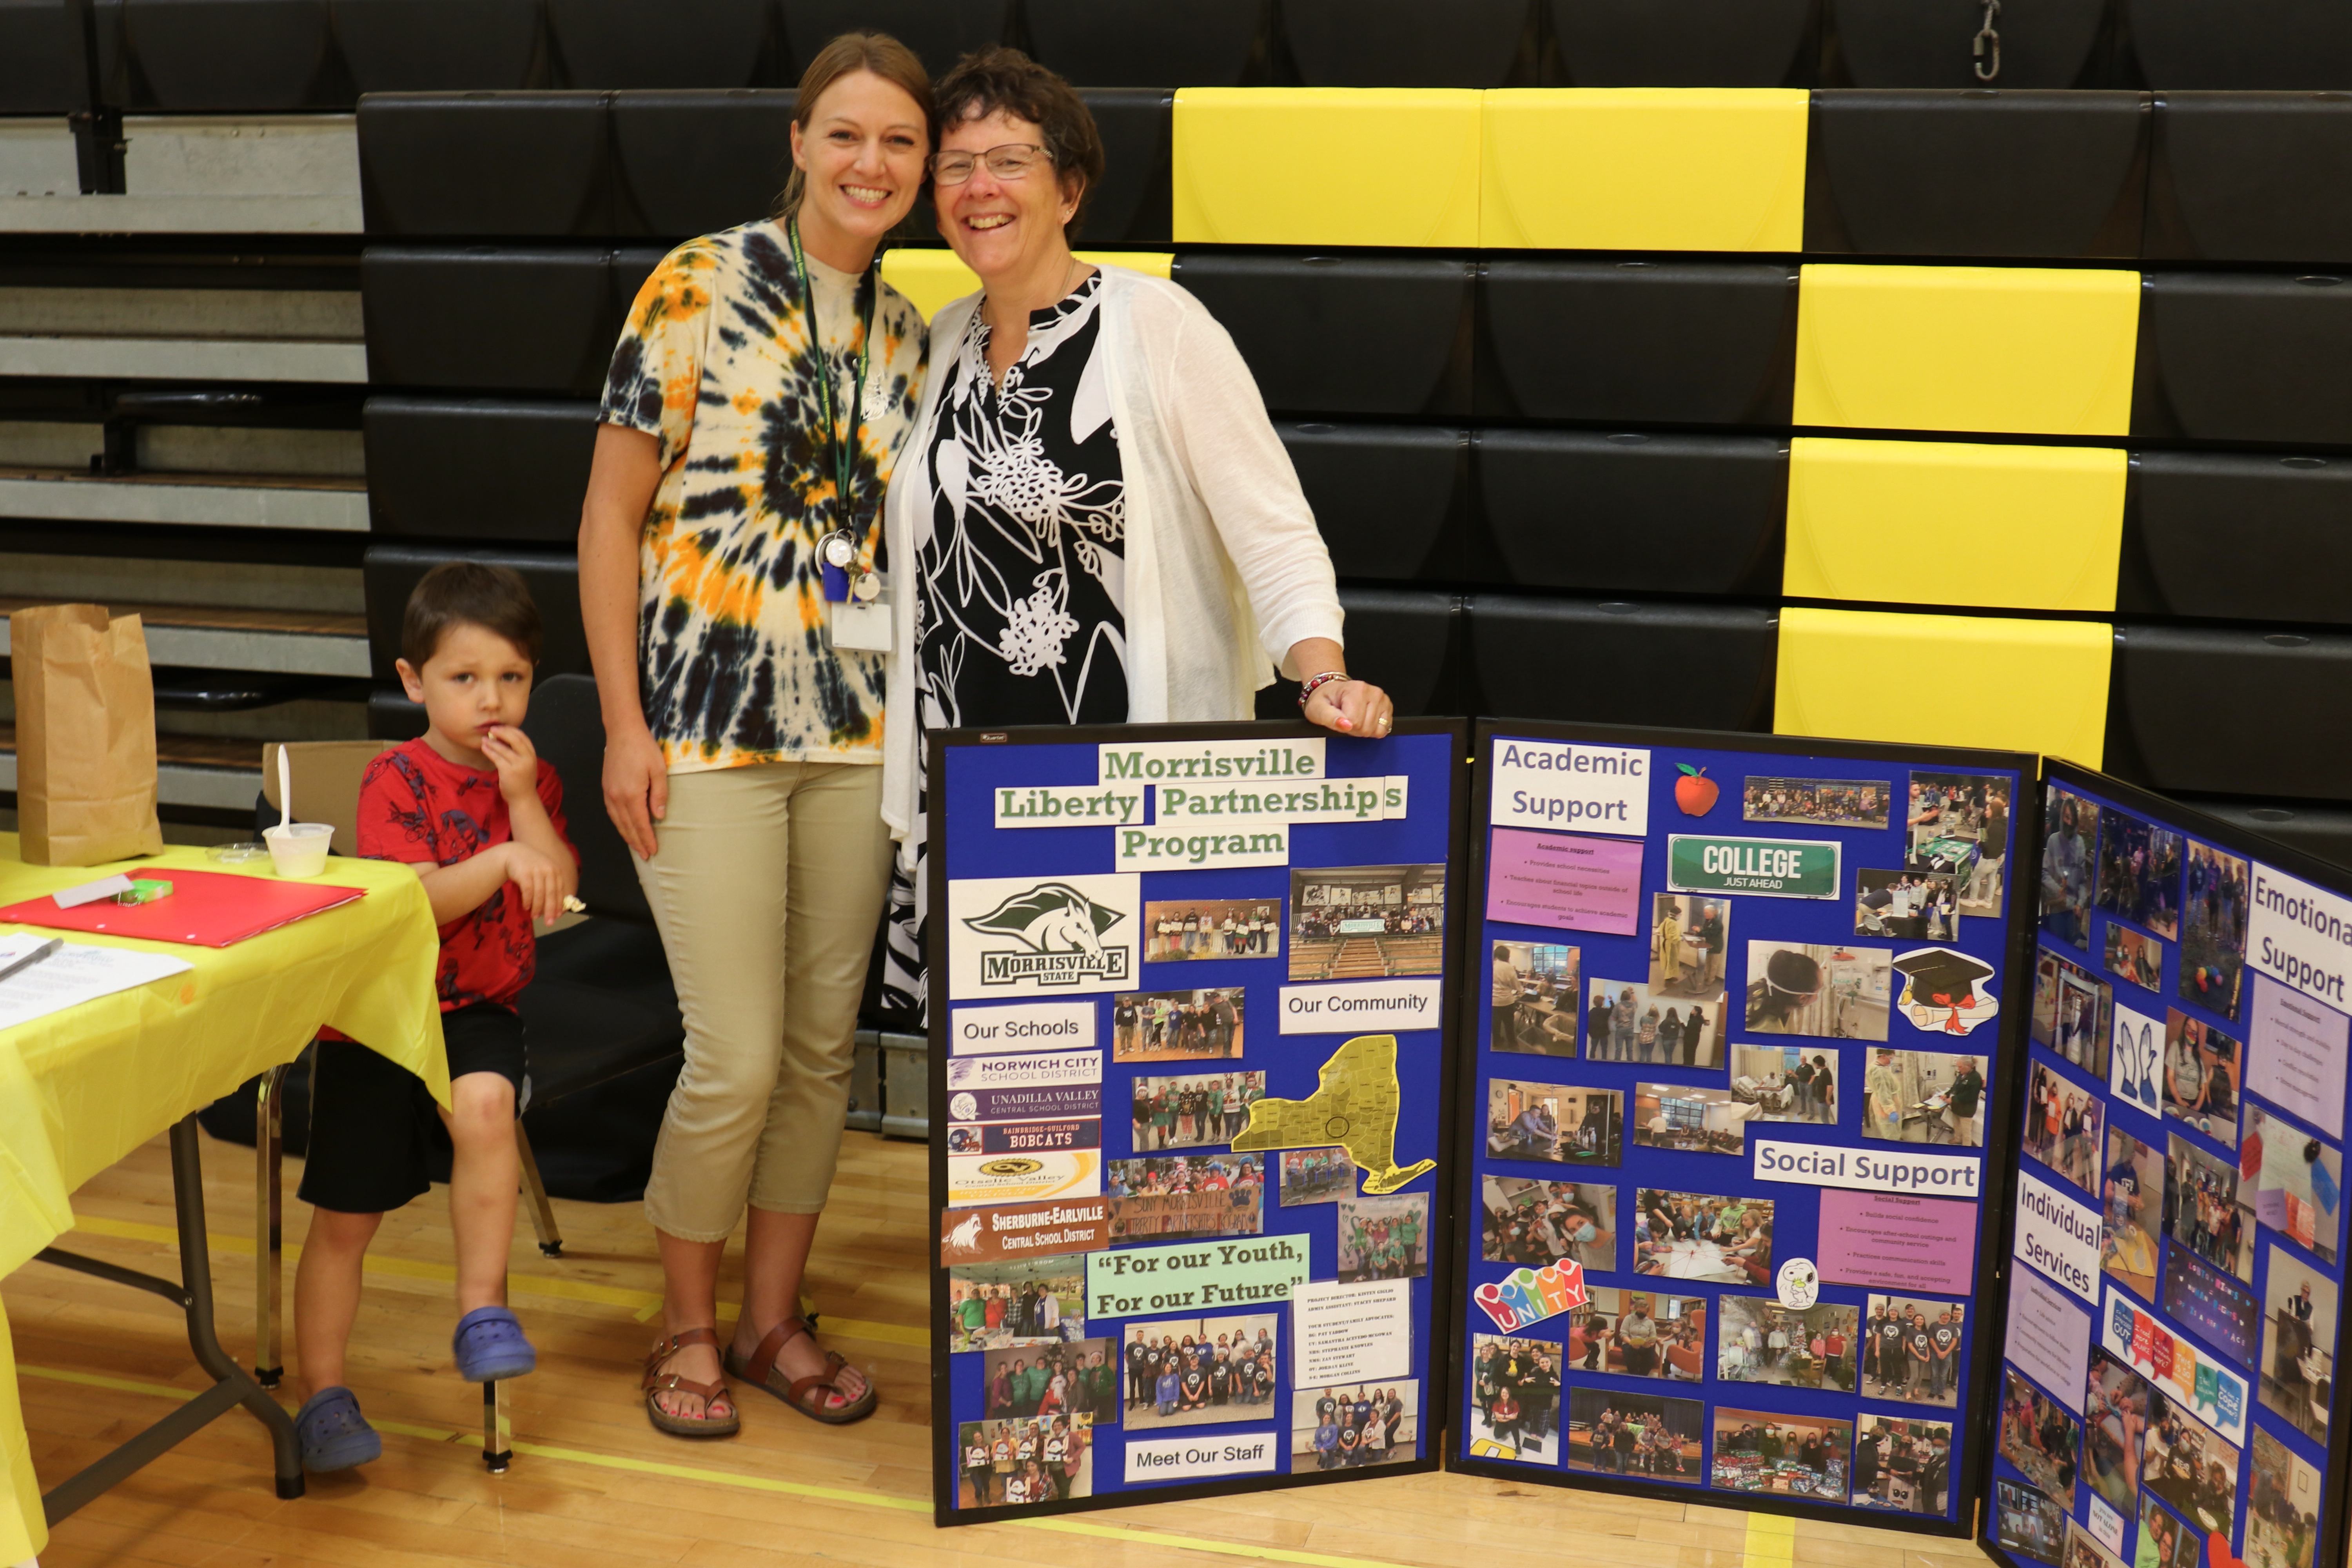 Two female educators stand in a school gym with a big poster featuring  Liberty Partnership, a school program providing extra help to students